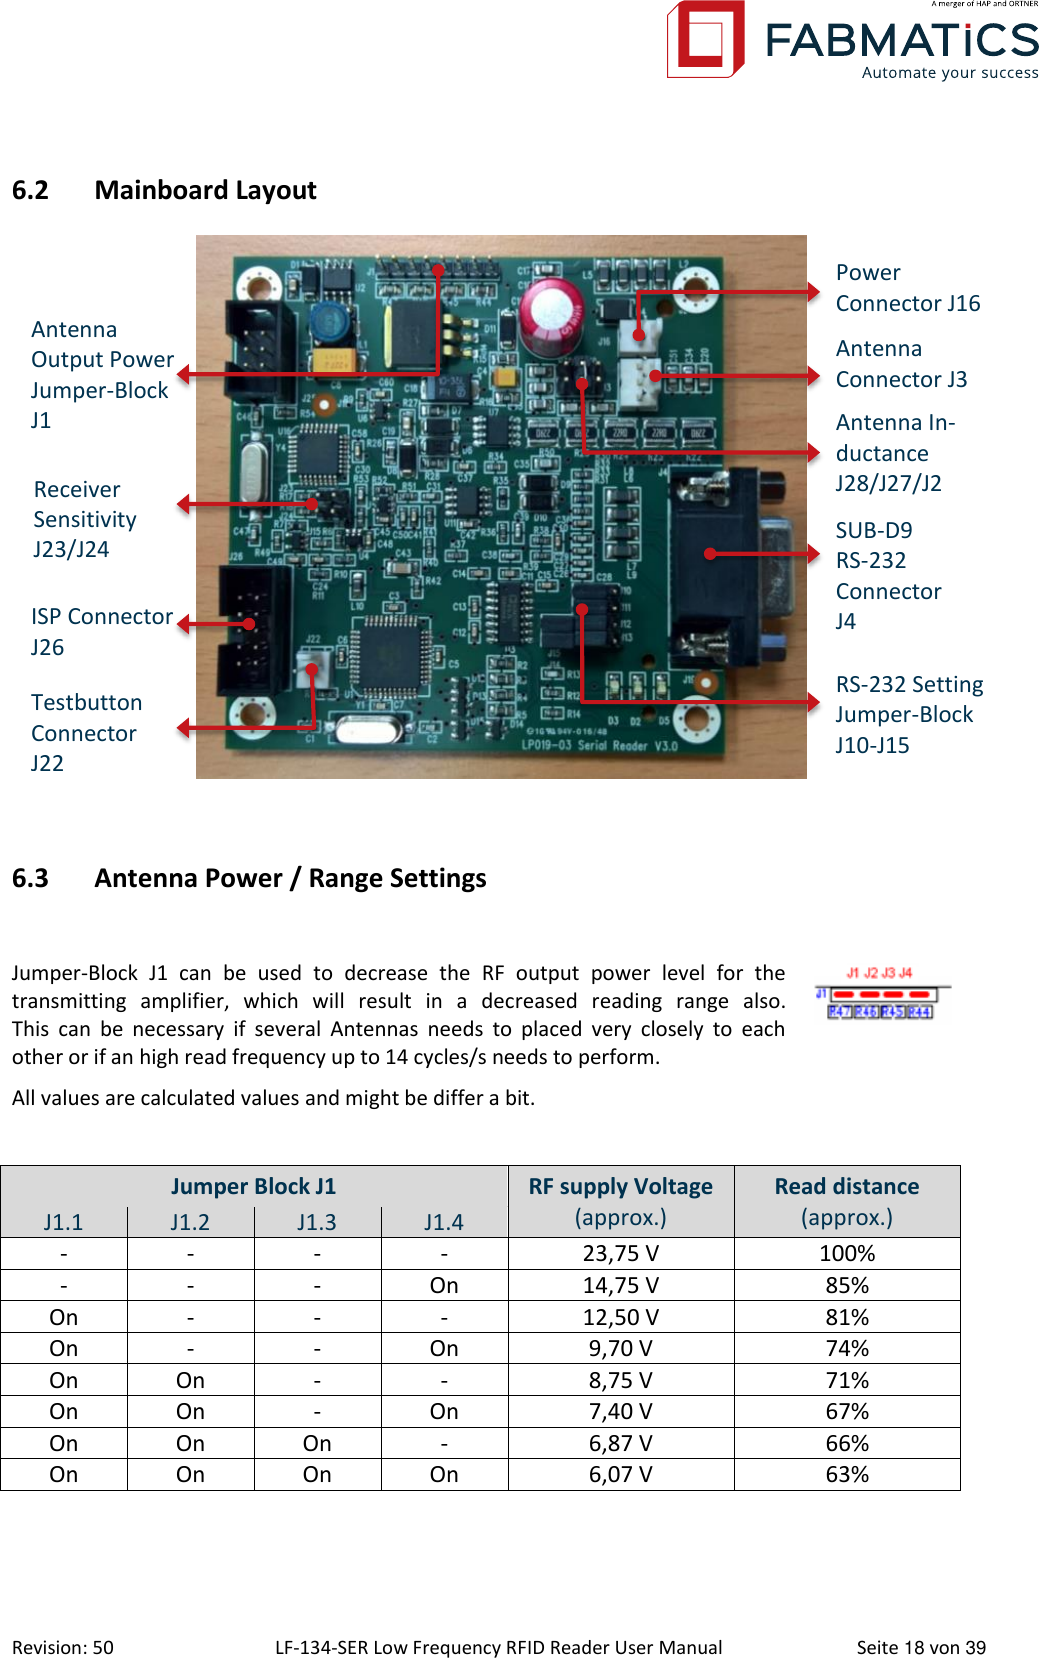  Revision: 50 LF-134-SER Low Frequency RFID Reader User Manual  Seite 18 von 39 6.2 Mainboard Layout   6.3 Antenna Power / Range Settings  Jumper-Block  J1  can  be  used  to  decrease  the  RF  output  power  level  for  the transmitting  amplifier,  which  will  result  in  a  decreased  reading  range  also. This  can  be  necessary  if  several  Antennas  needs  to  placed  very  closely  to  each other or if an high read frequency up to 14 cycles/s needs to perform. All values are calculated values and might be differ a bit.  Jumper Block J1 RF supply Voltage (approx.) Read distance (approx.) J1.1 J1.2 J1.3 J1.4 - - - - 23,75 V 100% - - - On 14,75 V 85% On - - - 12,50 V 81% On - - On 9,70 V 74% On On - - 8,75 V 71% On On - On 7,40 V 67% On On On - 6,87 V 66% On On On On 6,07 V 63%  Antenna Output Power Jumper-Block J1 ISP Connector J26 RS-232 Setting Jumper-Block J10-J15 SUB-D9 RS-232 Connector J4 Antenna Connector J3 Power Connector J16 Testbutton Connector J22 Antenna In-ductance J28/J27/J2 Receiver  Sensitivity J23/J24 